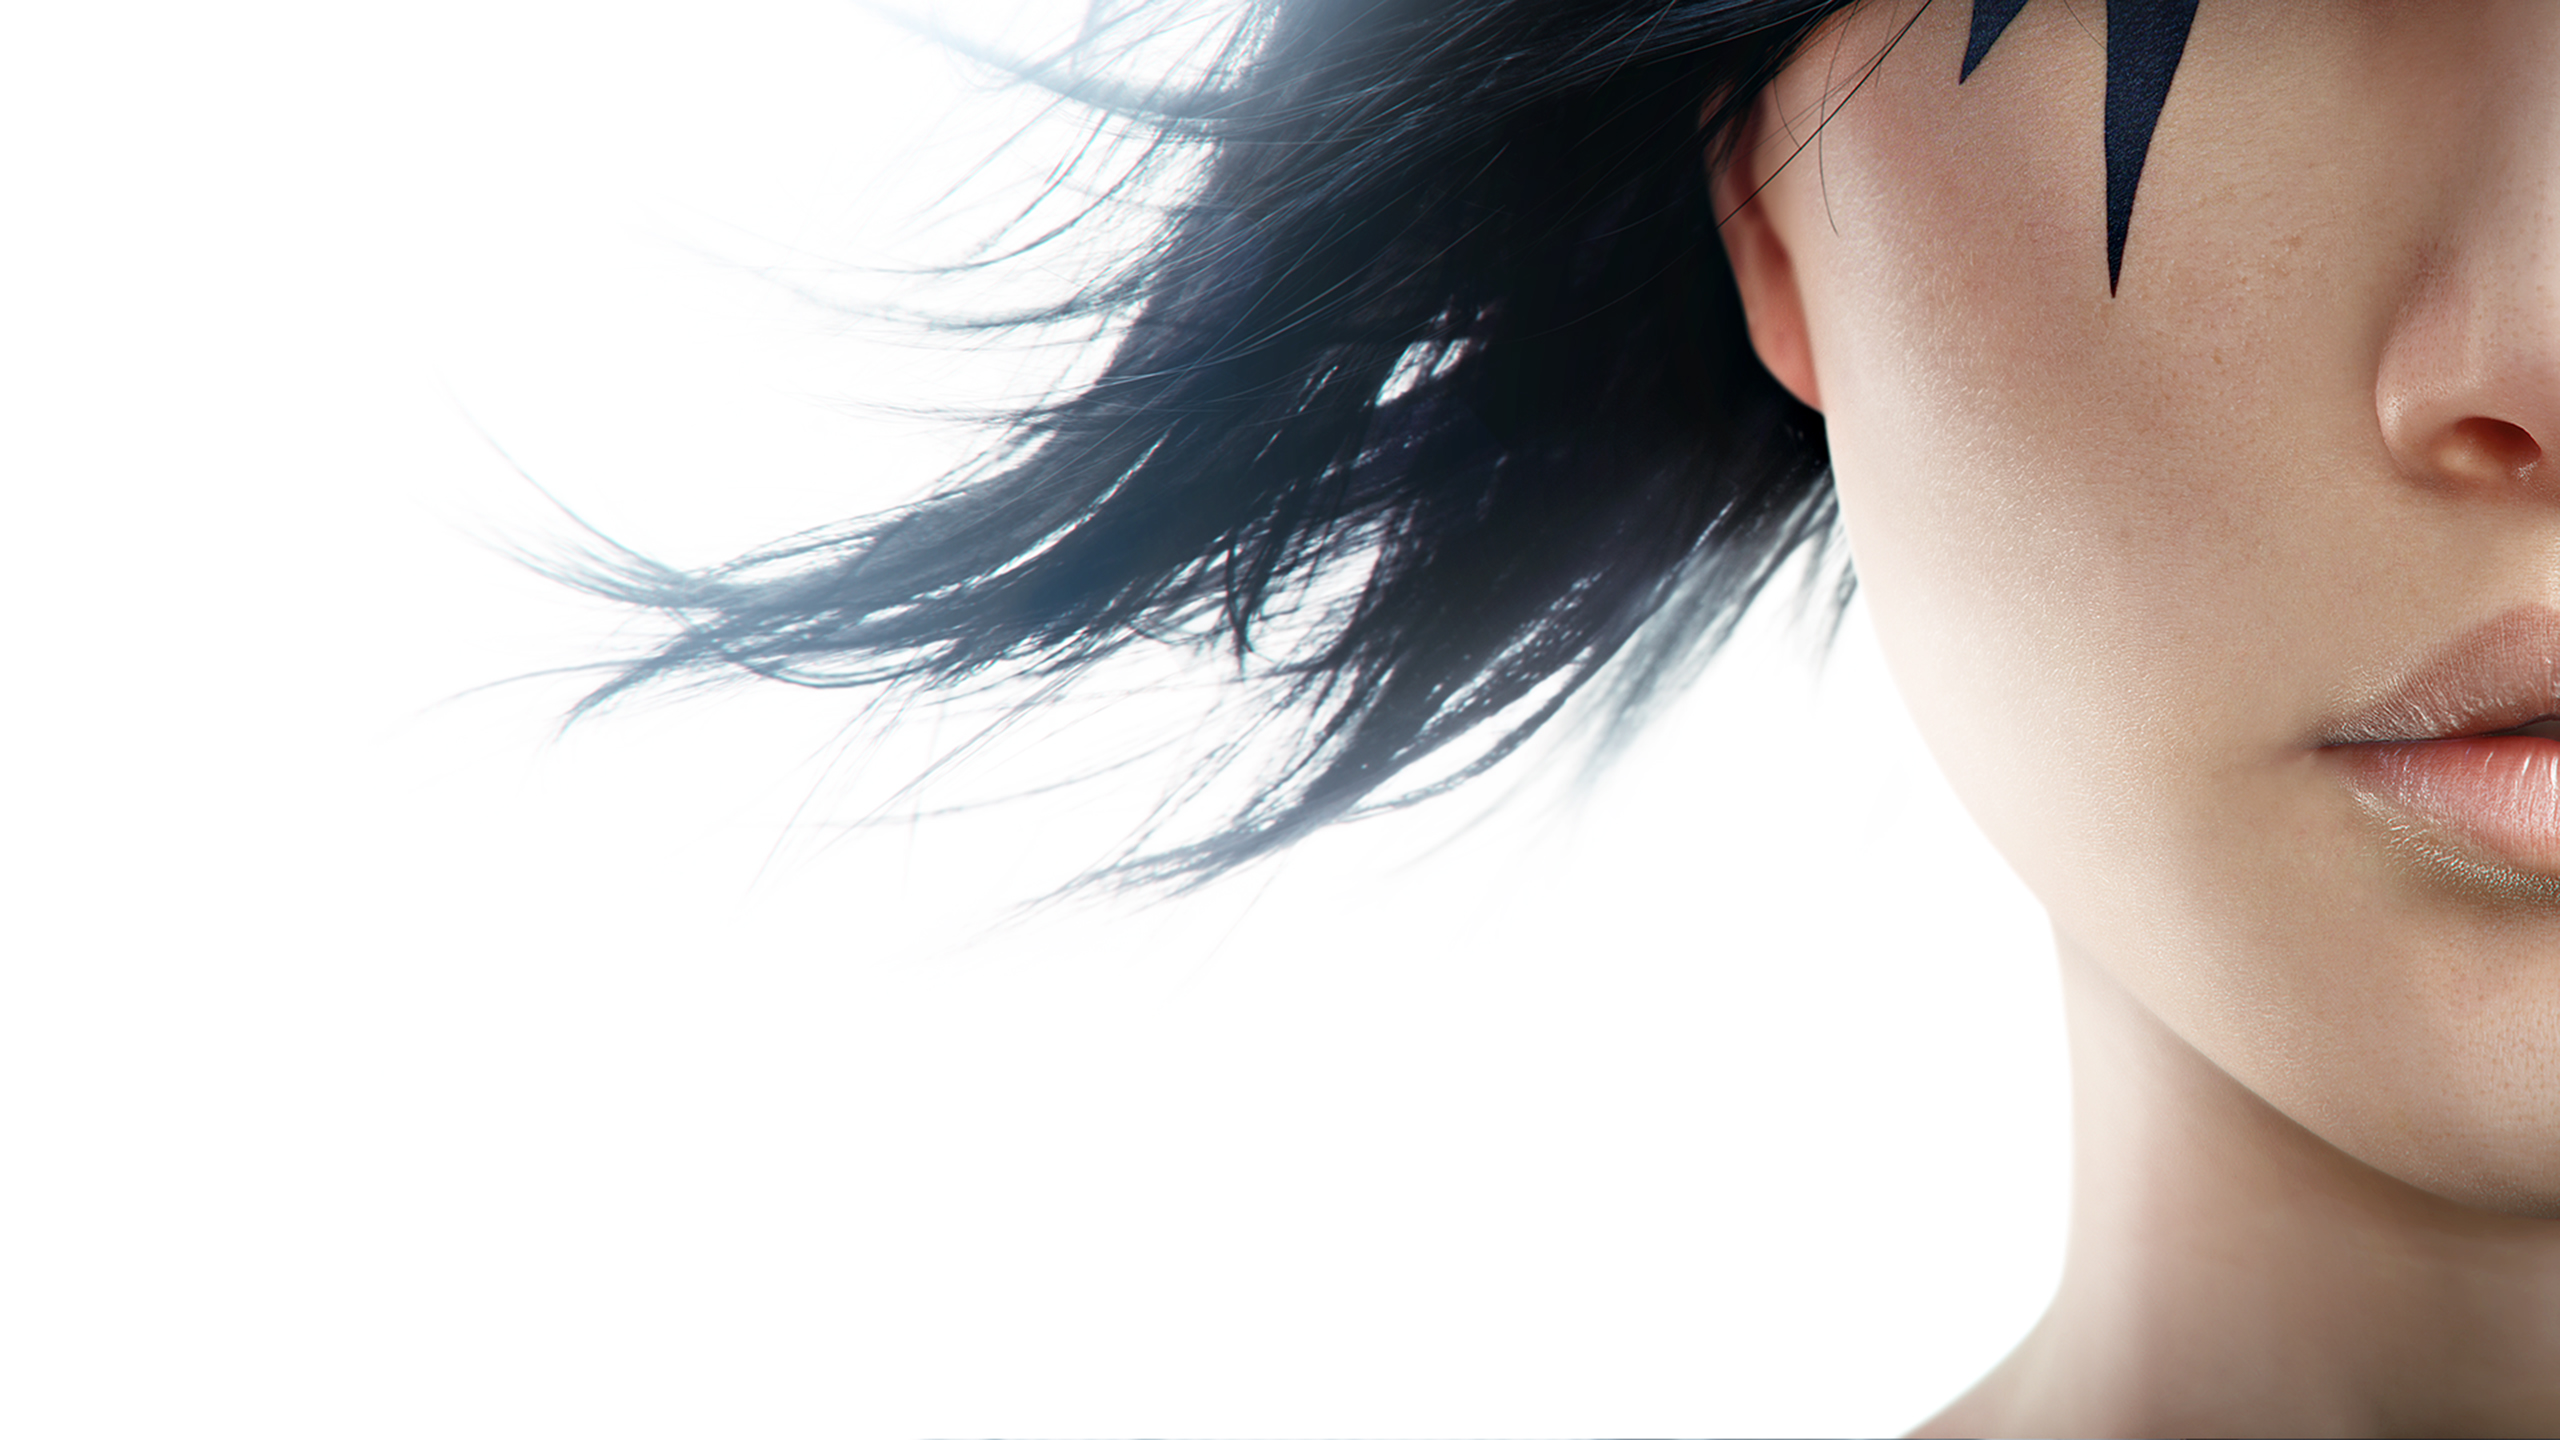 General 2560x1440 video games Faith Connors Mirror's Edge PC gaming women video game girls simple background white background face dark hair video game art dice Electronic Arts